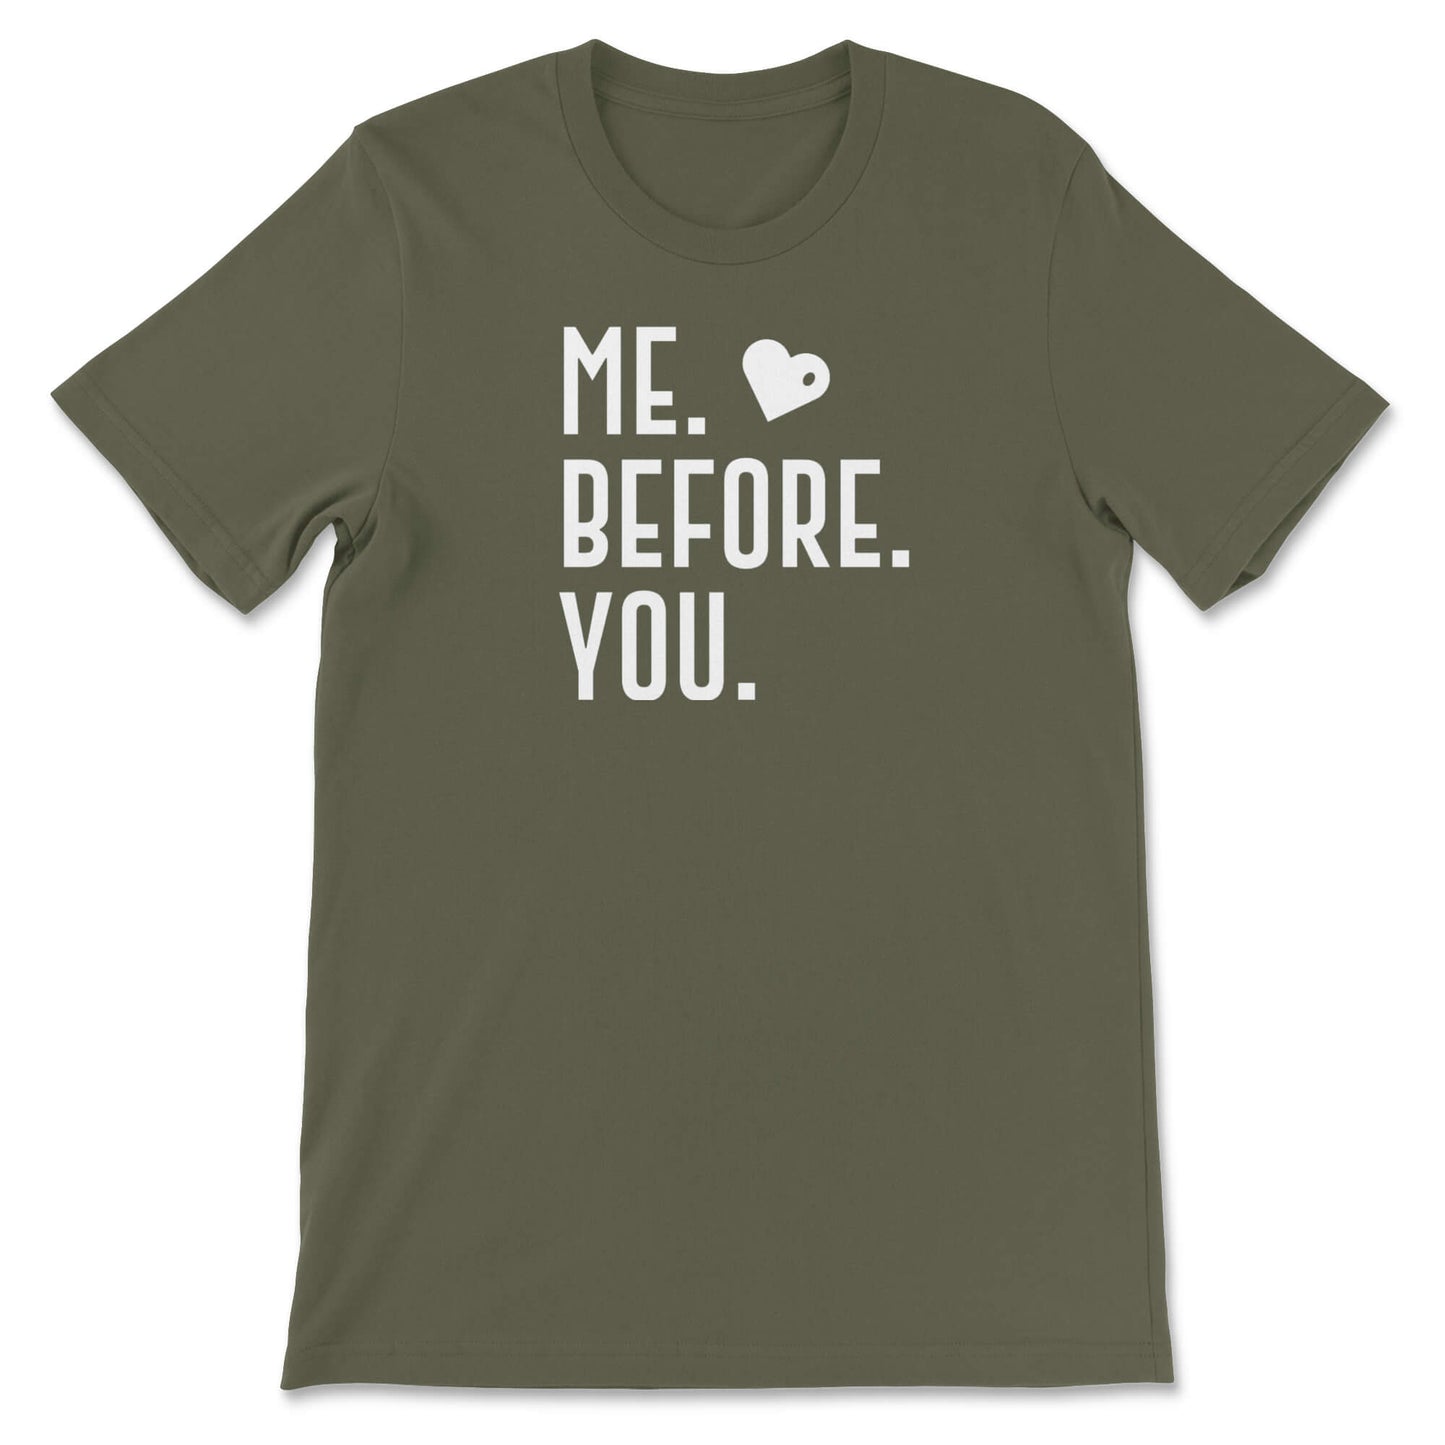 Me. Before. You. Graphics T-Shirt military Bhooki